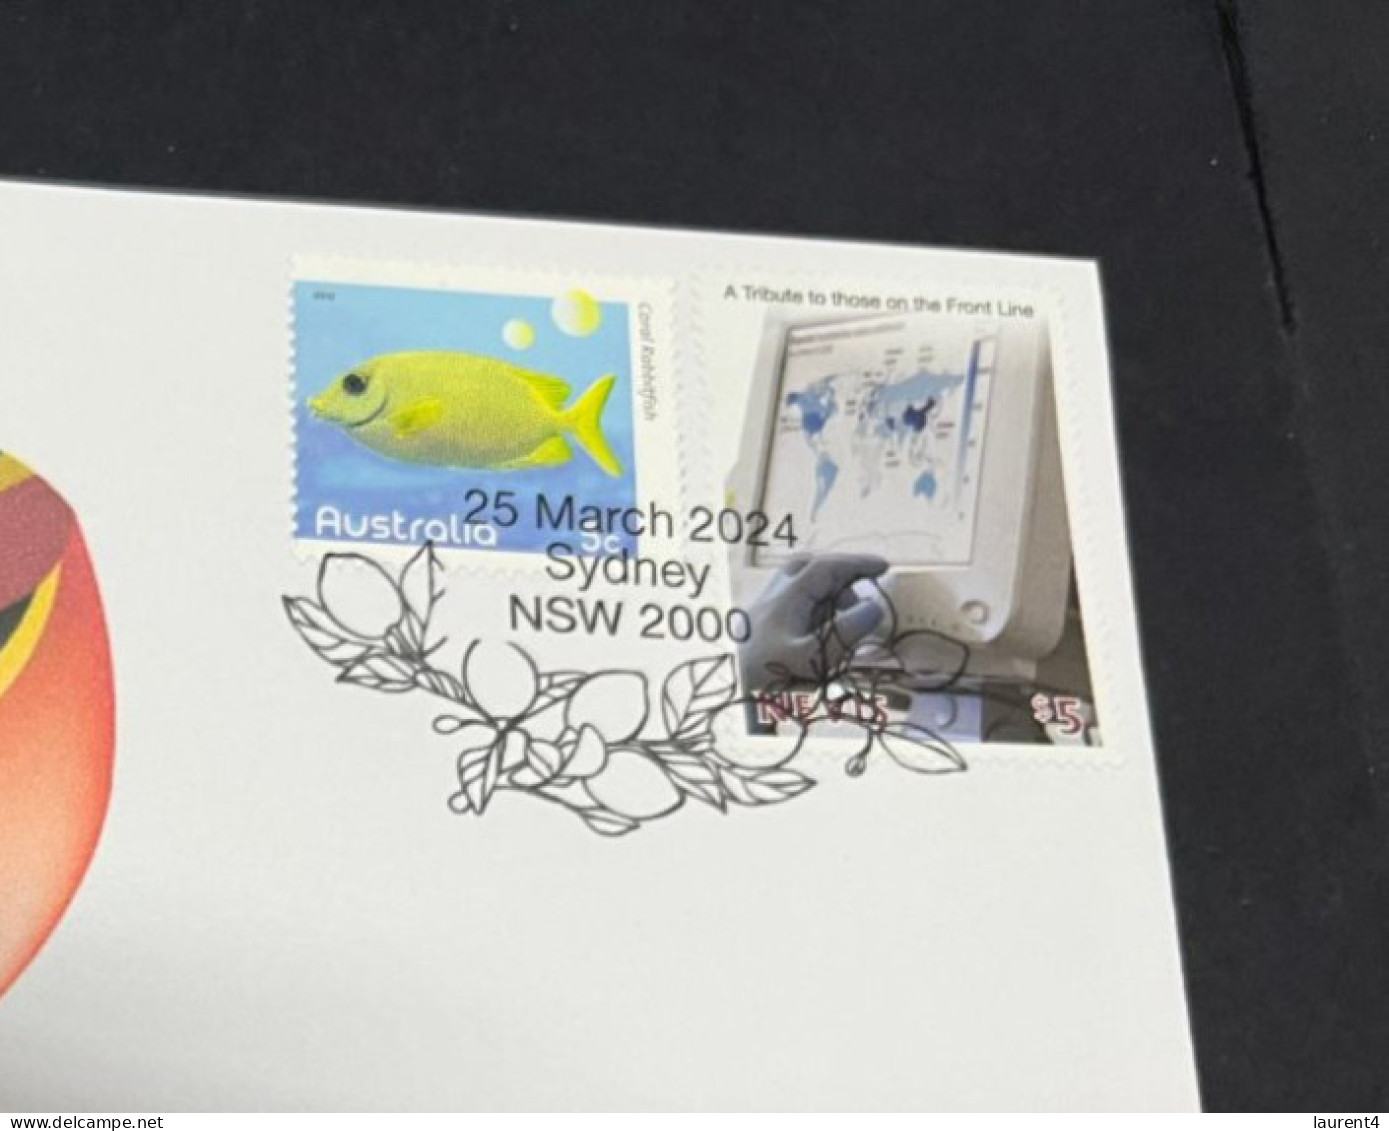 25-3-2024 (4 Y 2) COVID-19 4th Anniversary - St Kitts & Nevis- 25 March 2024 (with Saint Kitts & Nevis COVID-19 Stamp) - Maladies